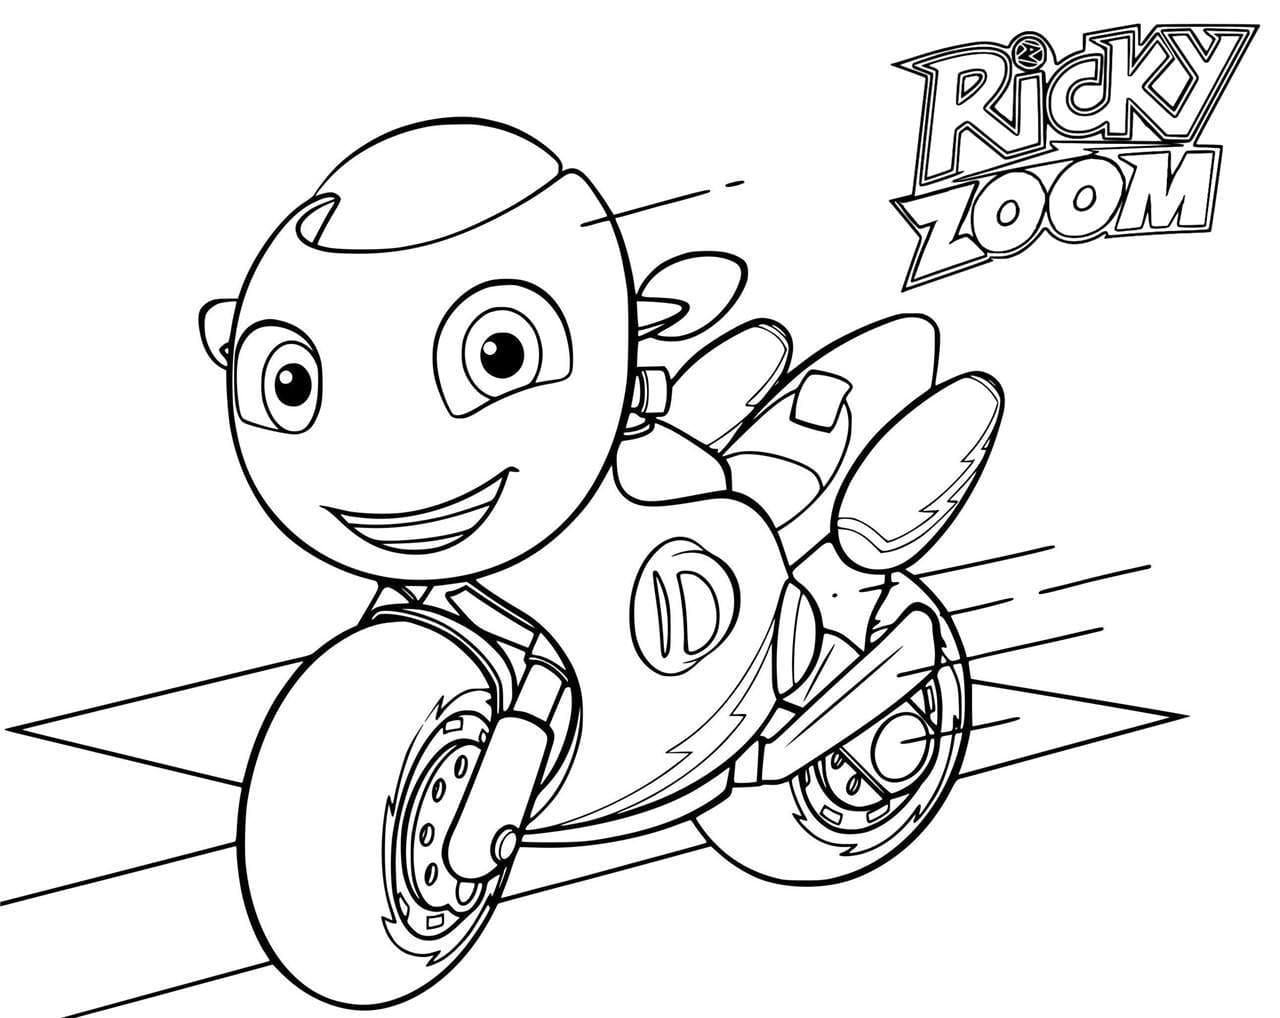 Ricky Zoom Coloring Pages  Coloring Pages for Kids